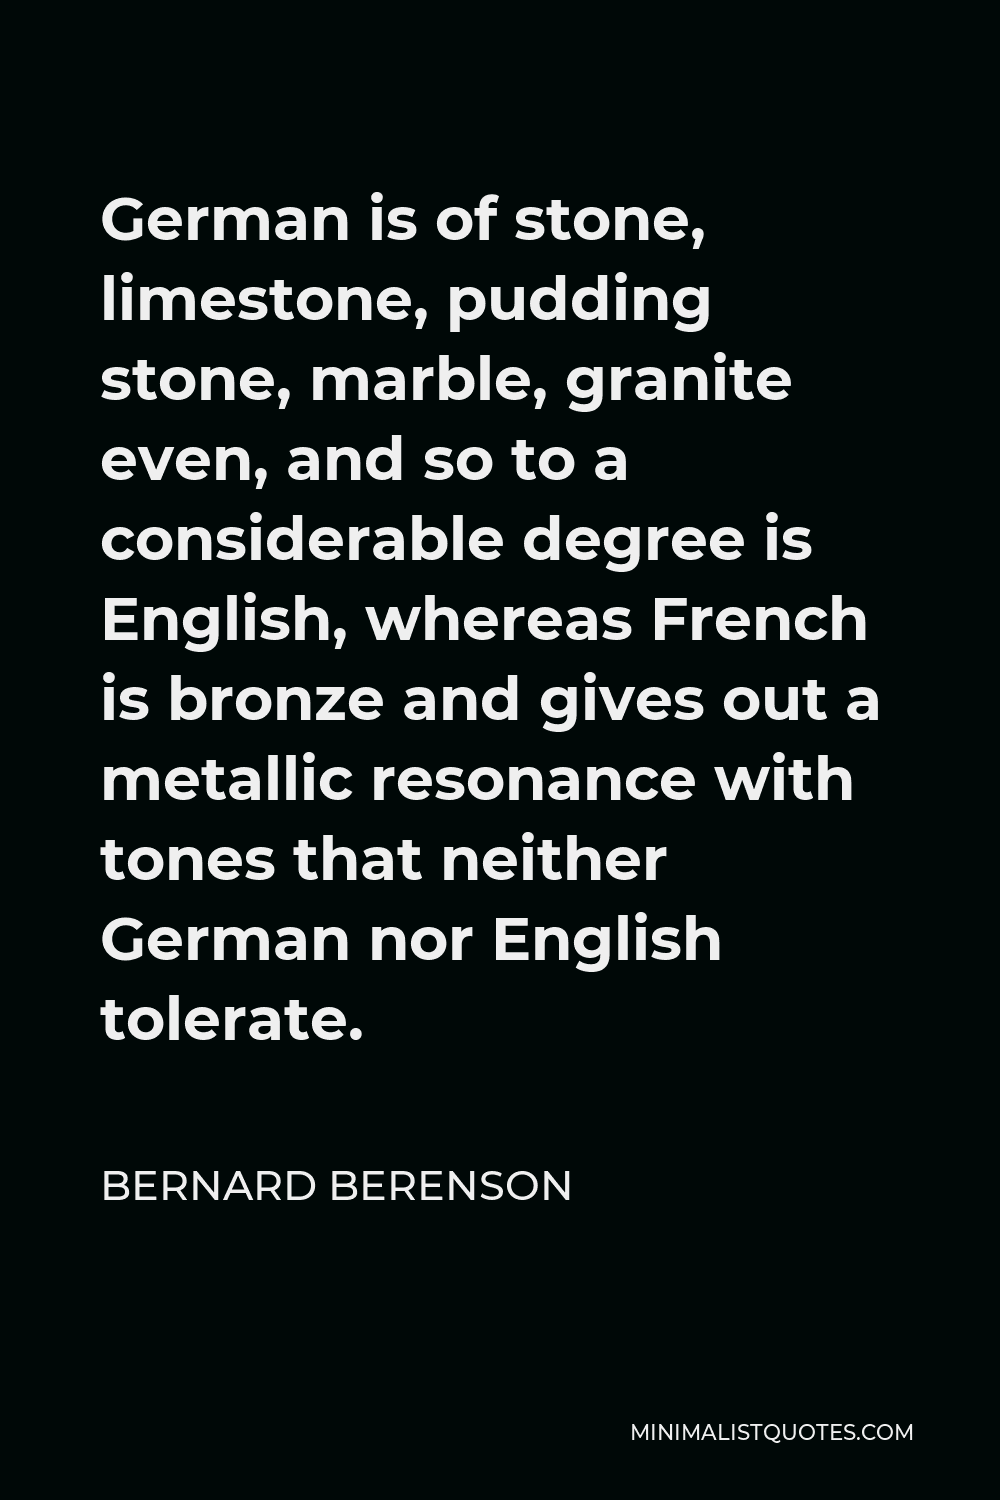 Bernard Berenson Quote - German is of stone, limestone, pudding stone, marble, granite even, and so to a considerable degree is English, whereas French is bronze and gives out a metallic resonance with tones that neither German nor English tolerate.